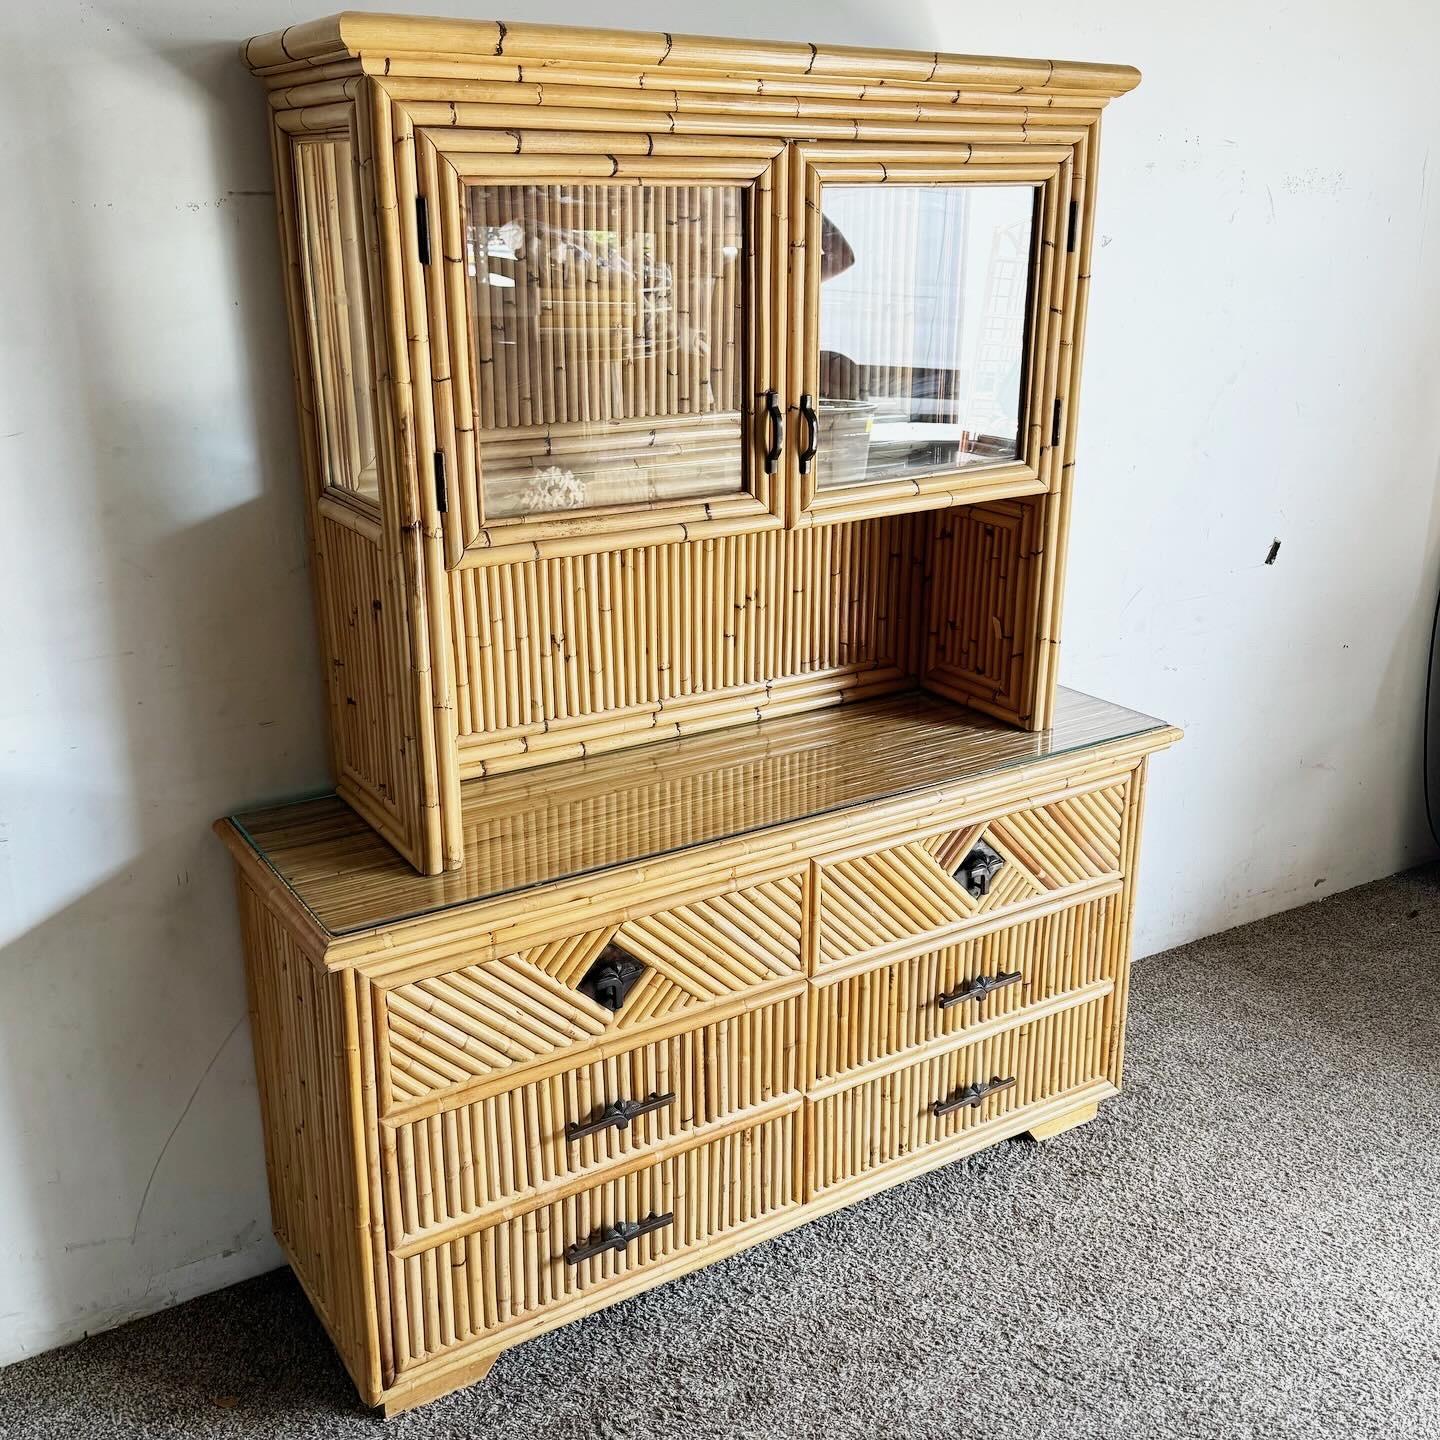 Elevate your decor with the Boho Bamboo Credenza & Hutch Set, blending natural pencil reed and bamboo for a striking storage solution. A perfect blend of style and function, adding a boho chic touch to any room.
Vintage pieces may have age-related